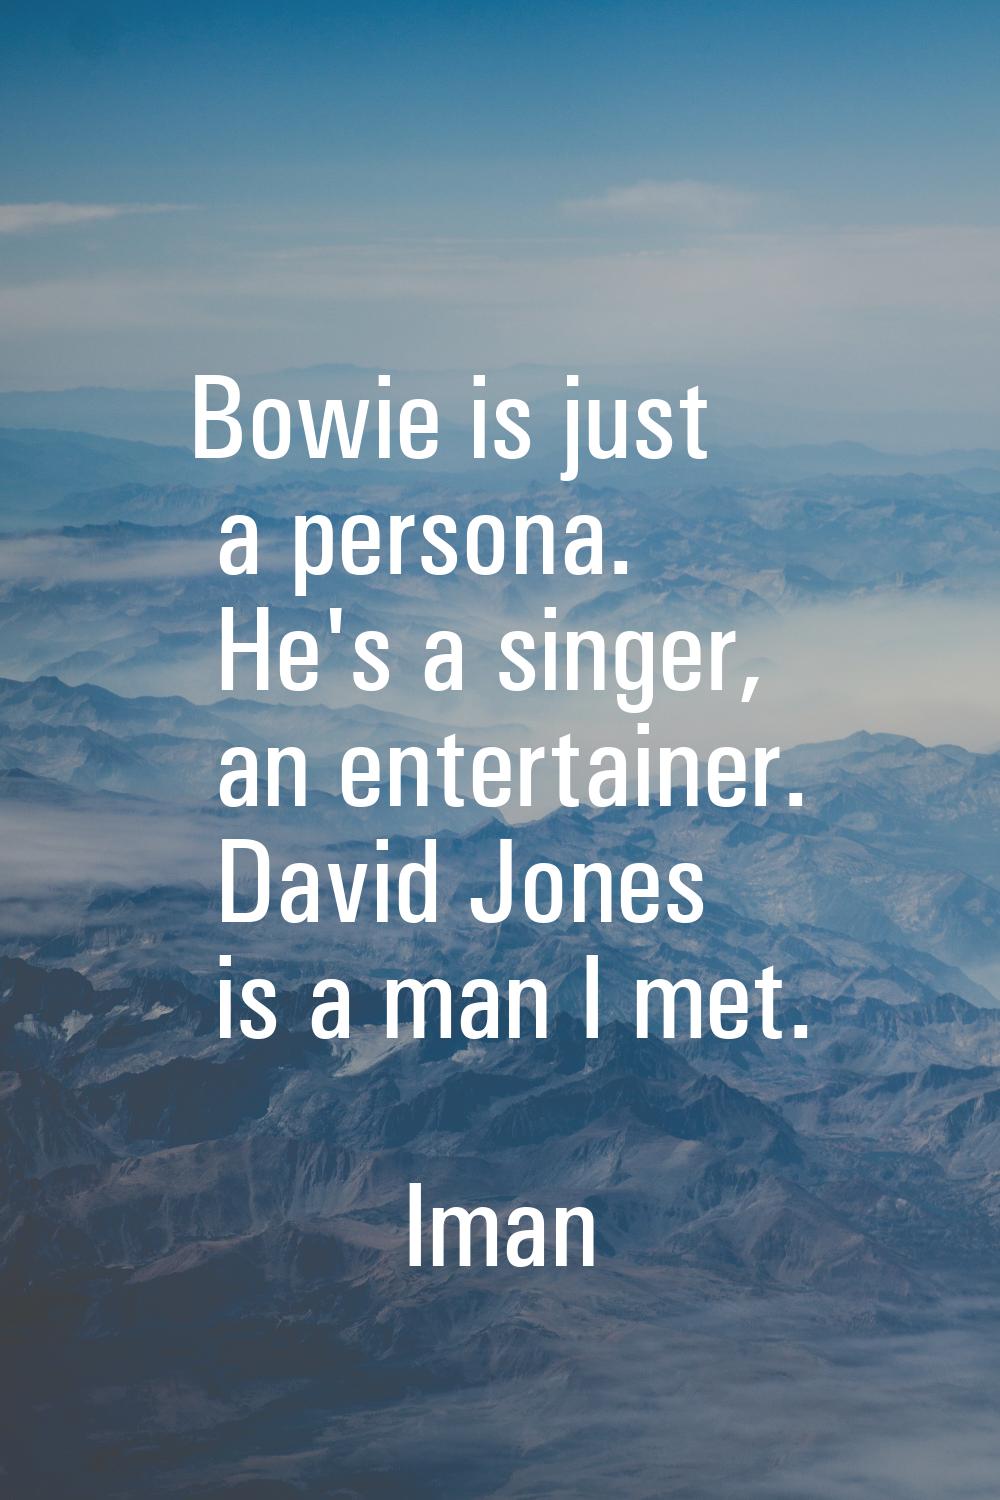 Bowie is just a persona. He's a singer, an entertainer. David Jones is a man I met.